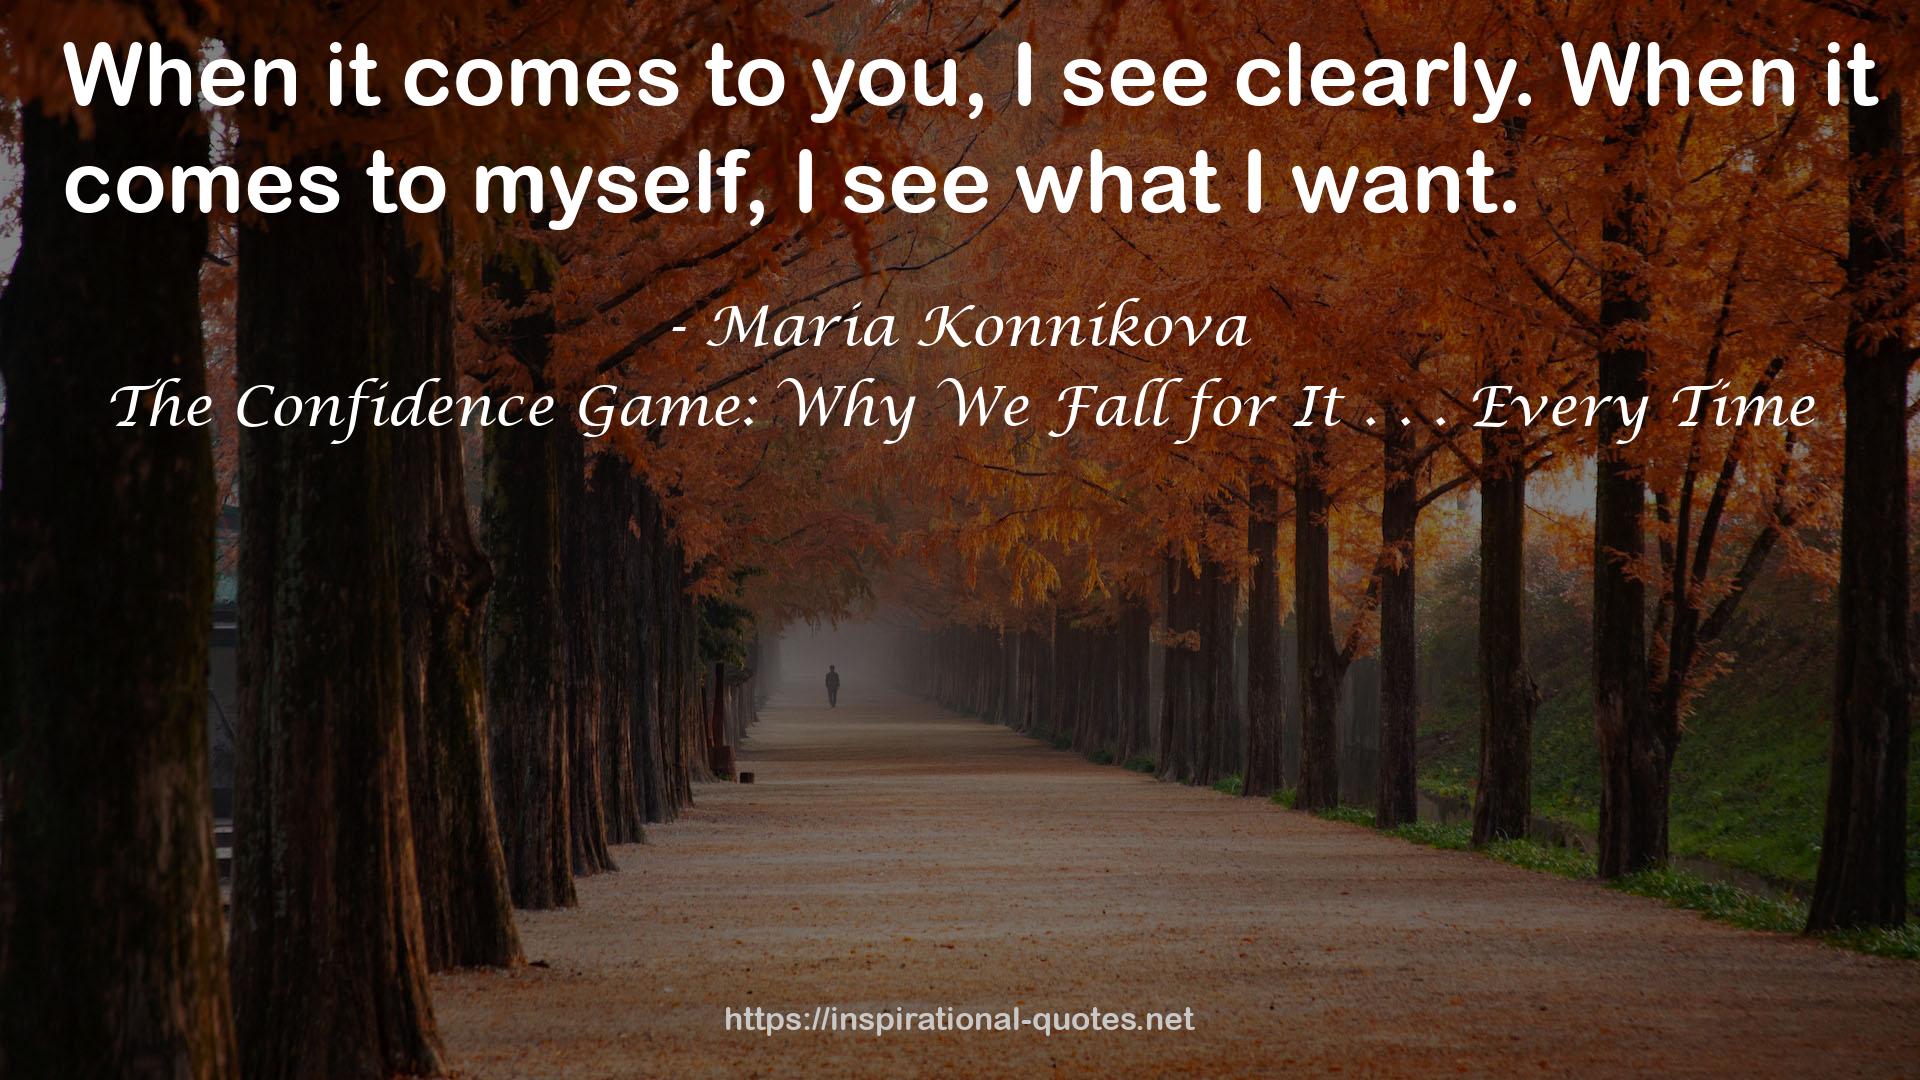 The Confidence Game: Why We Fall for It . . . Every Time QUOTES